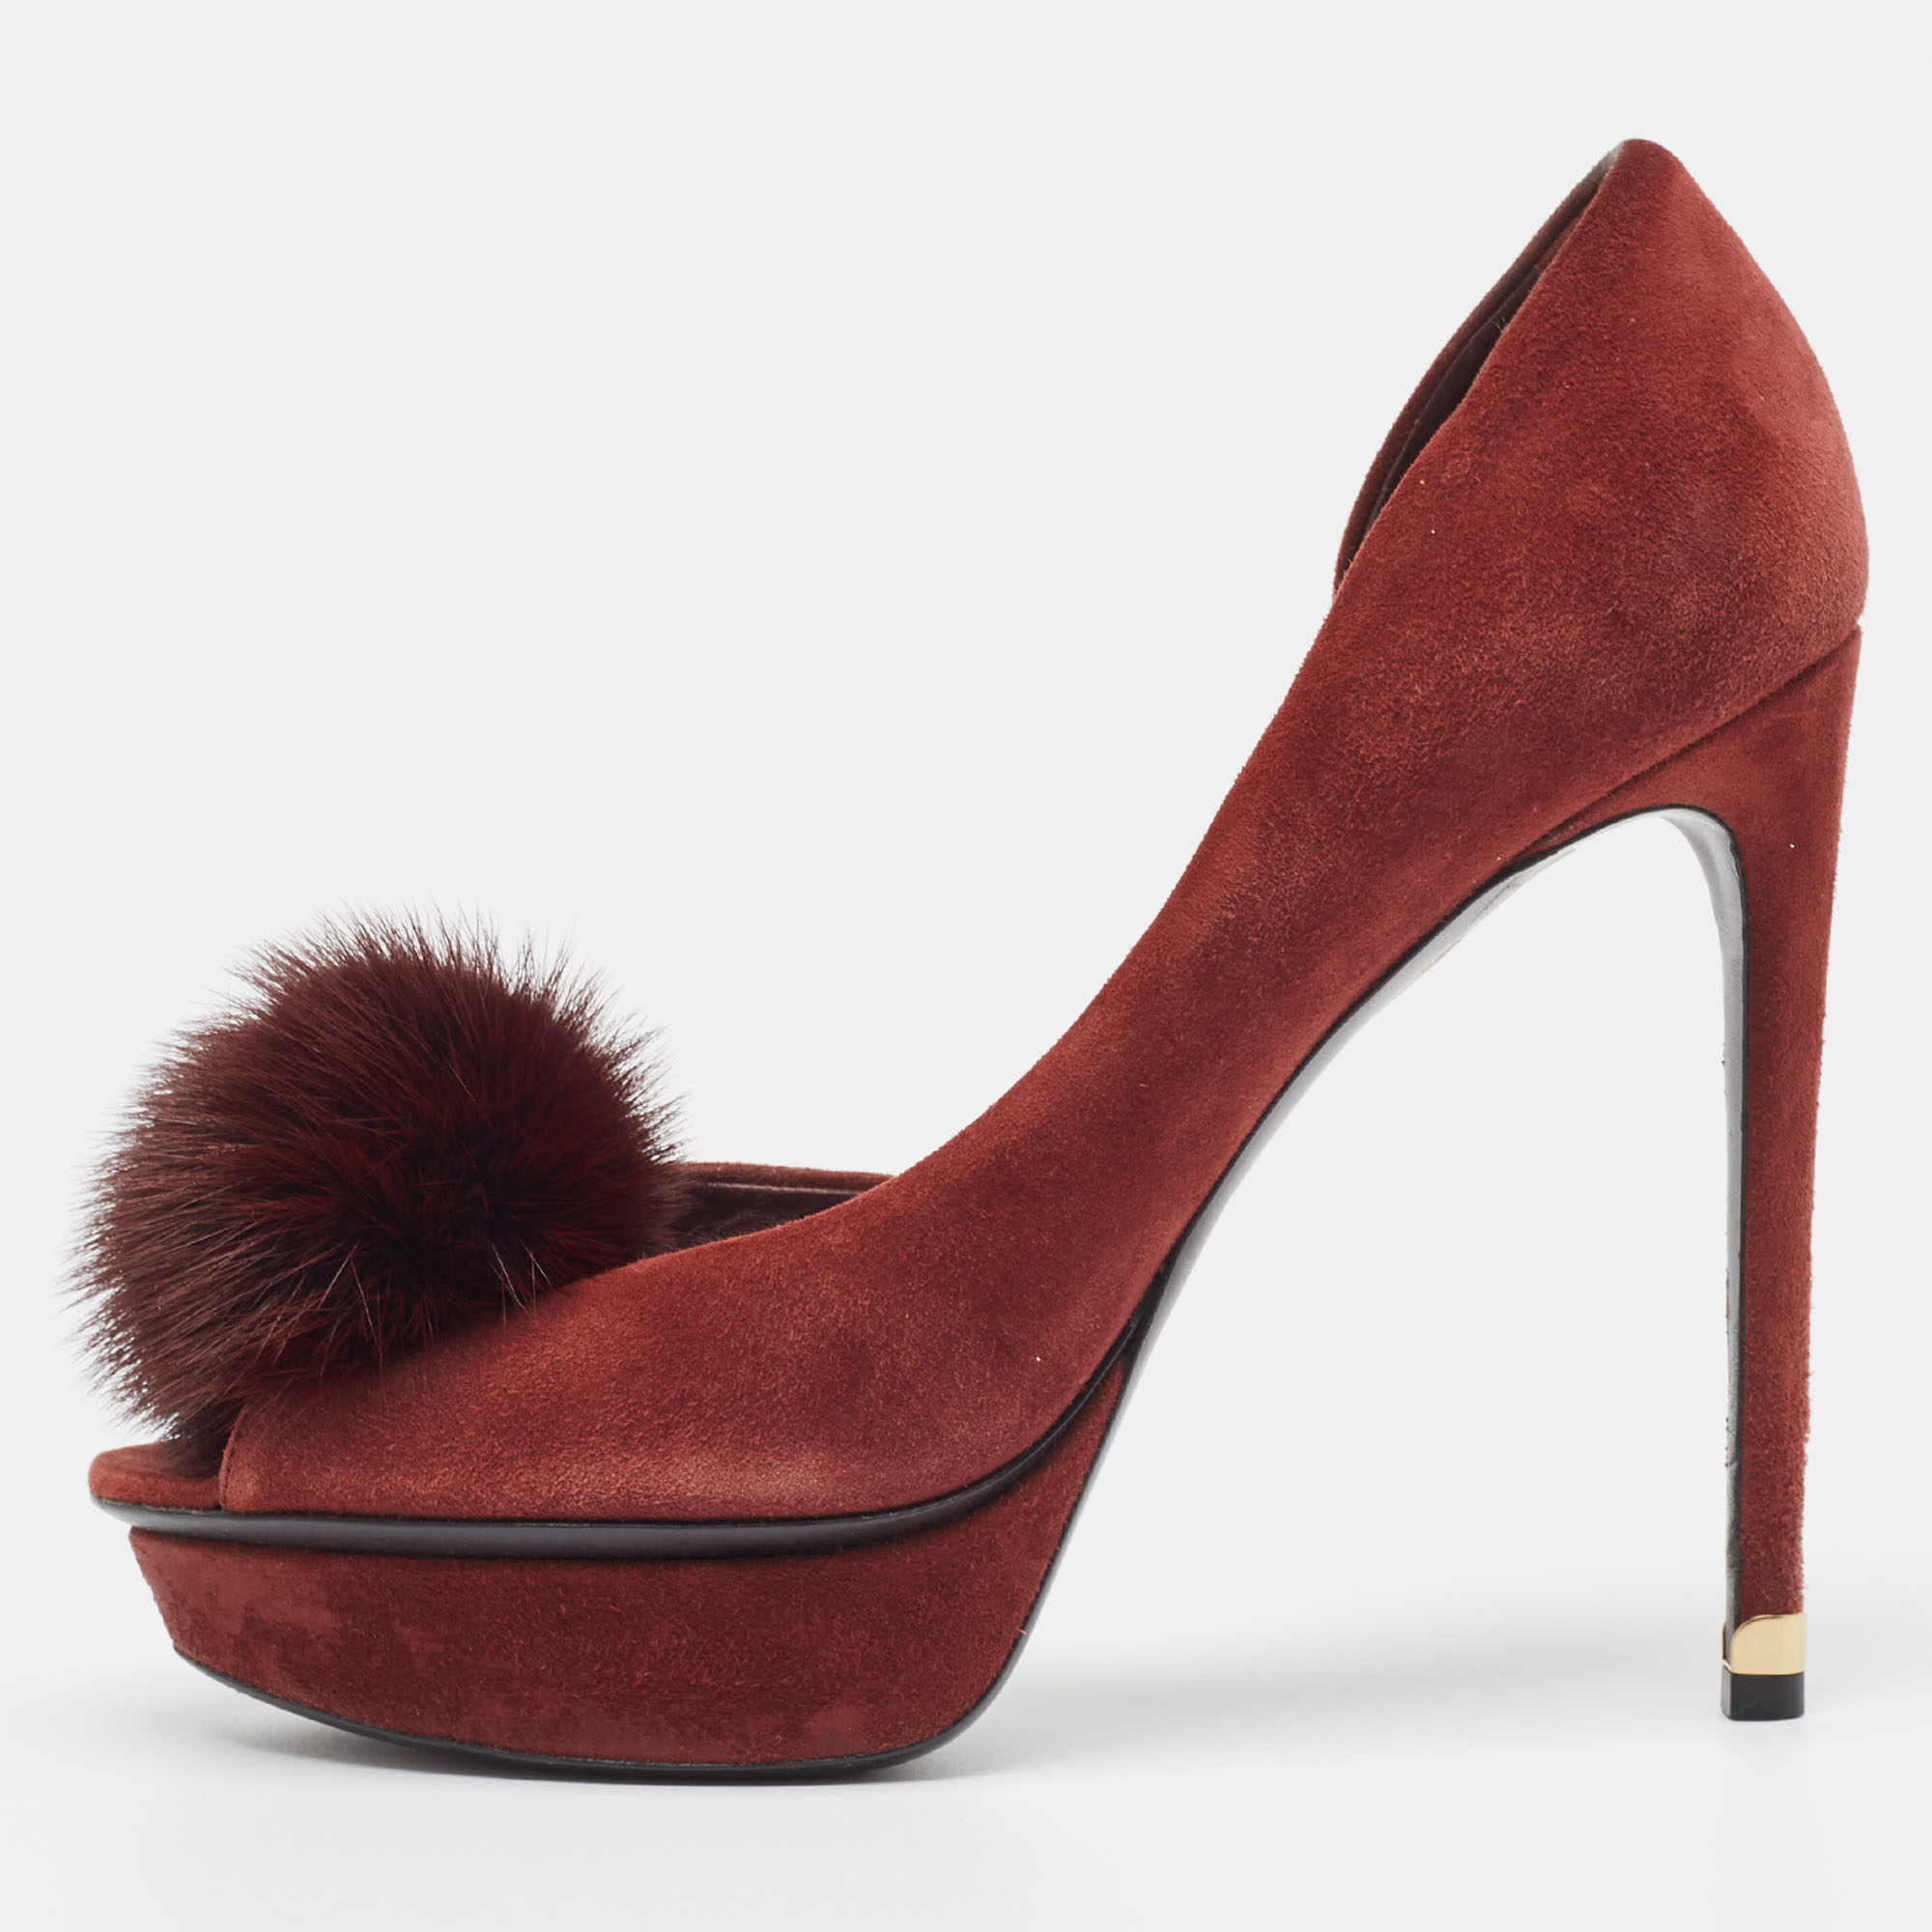 Pre-owned Louis Vuitton Burgundy Suede And Fur Peep Toe Pumps Size 37